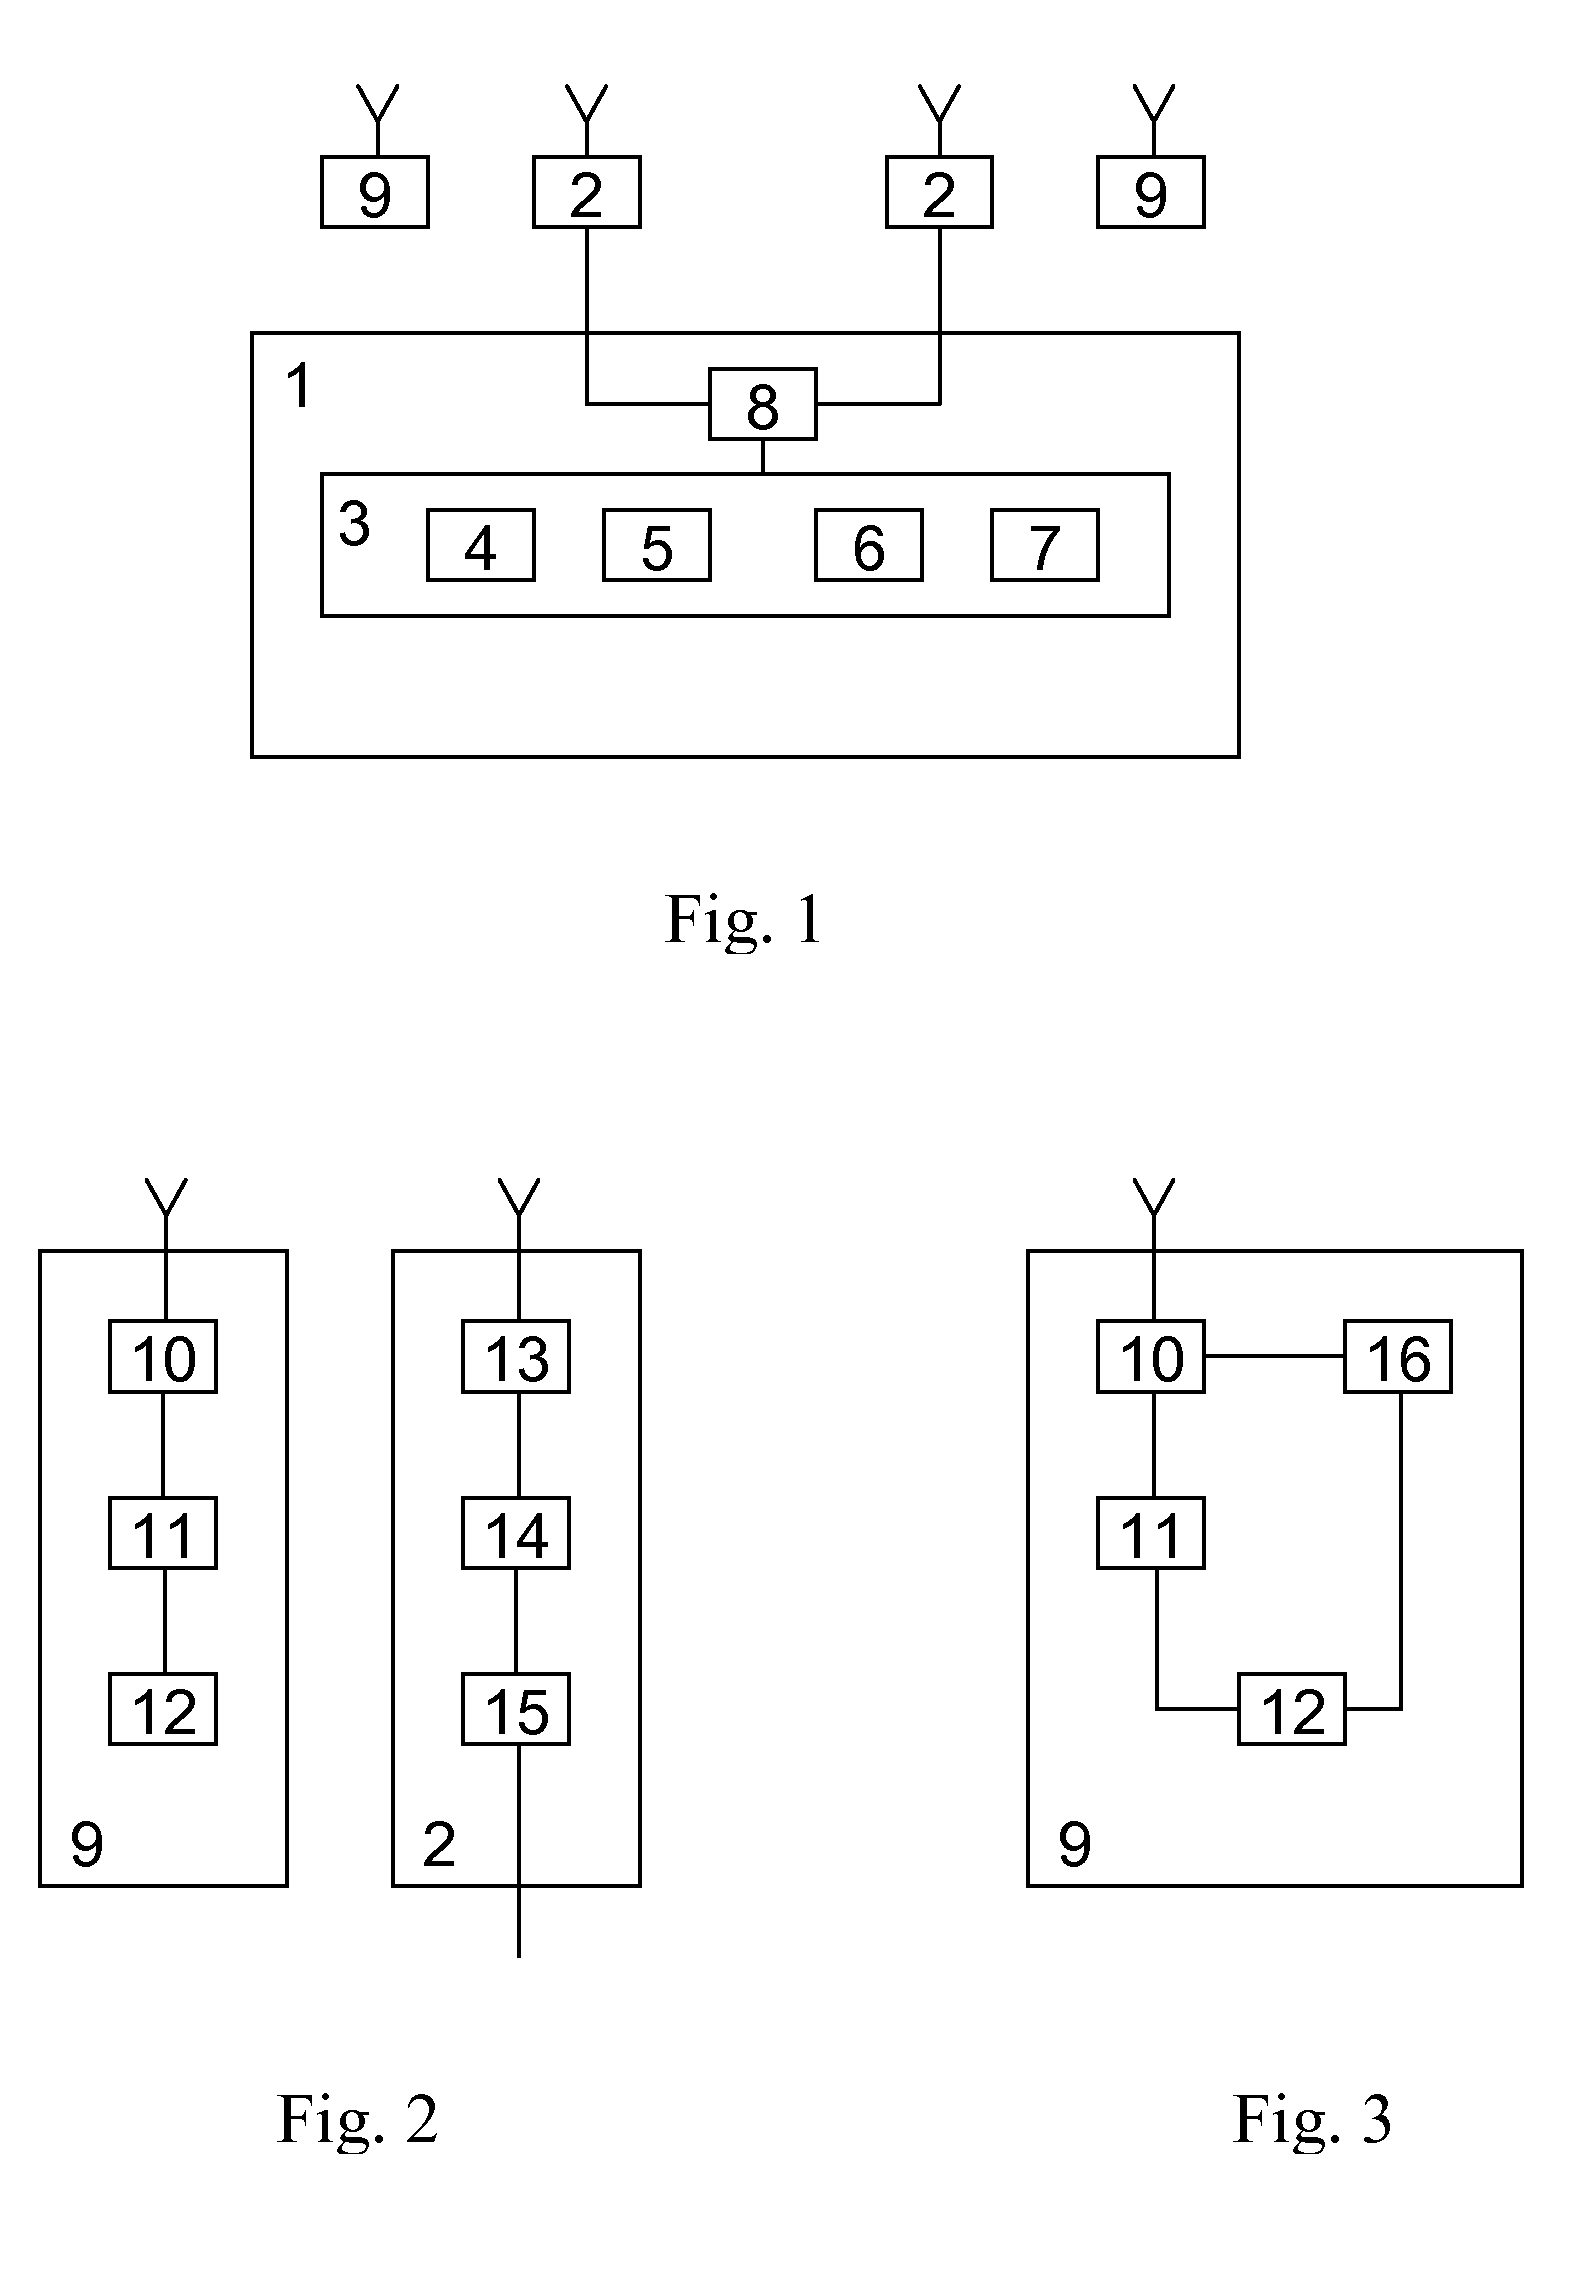 Subscriber calling method (variants) and a communications device system for carrying out said method